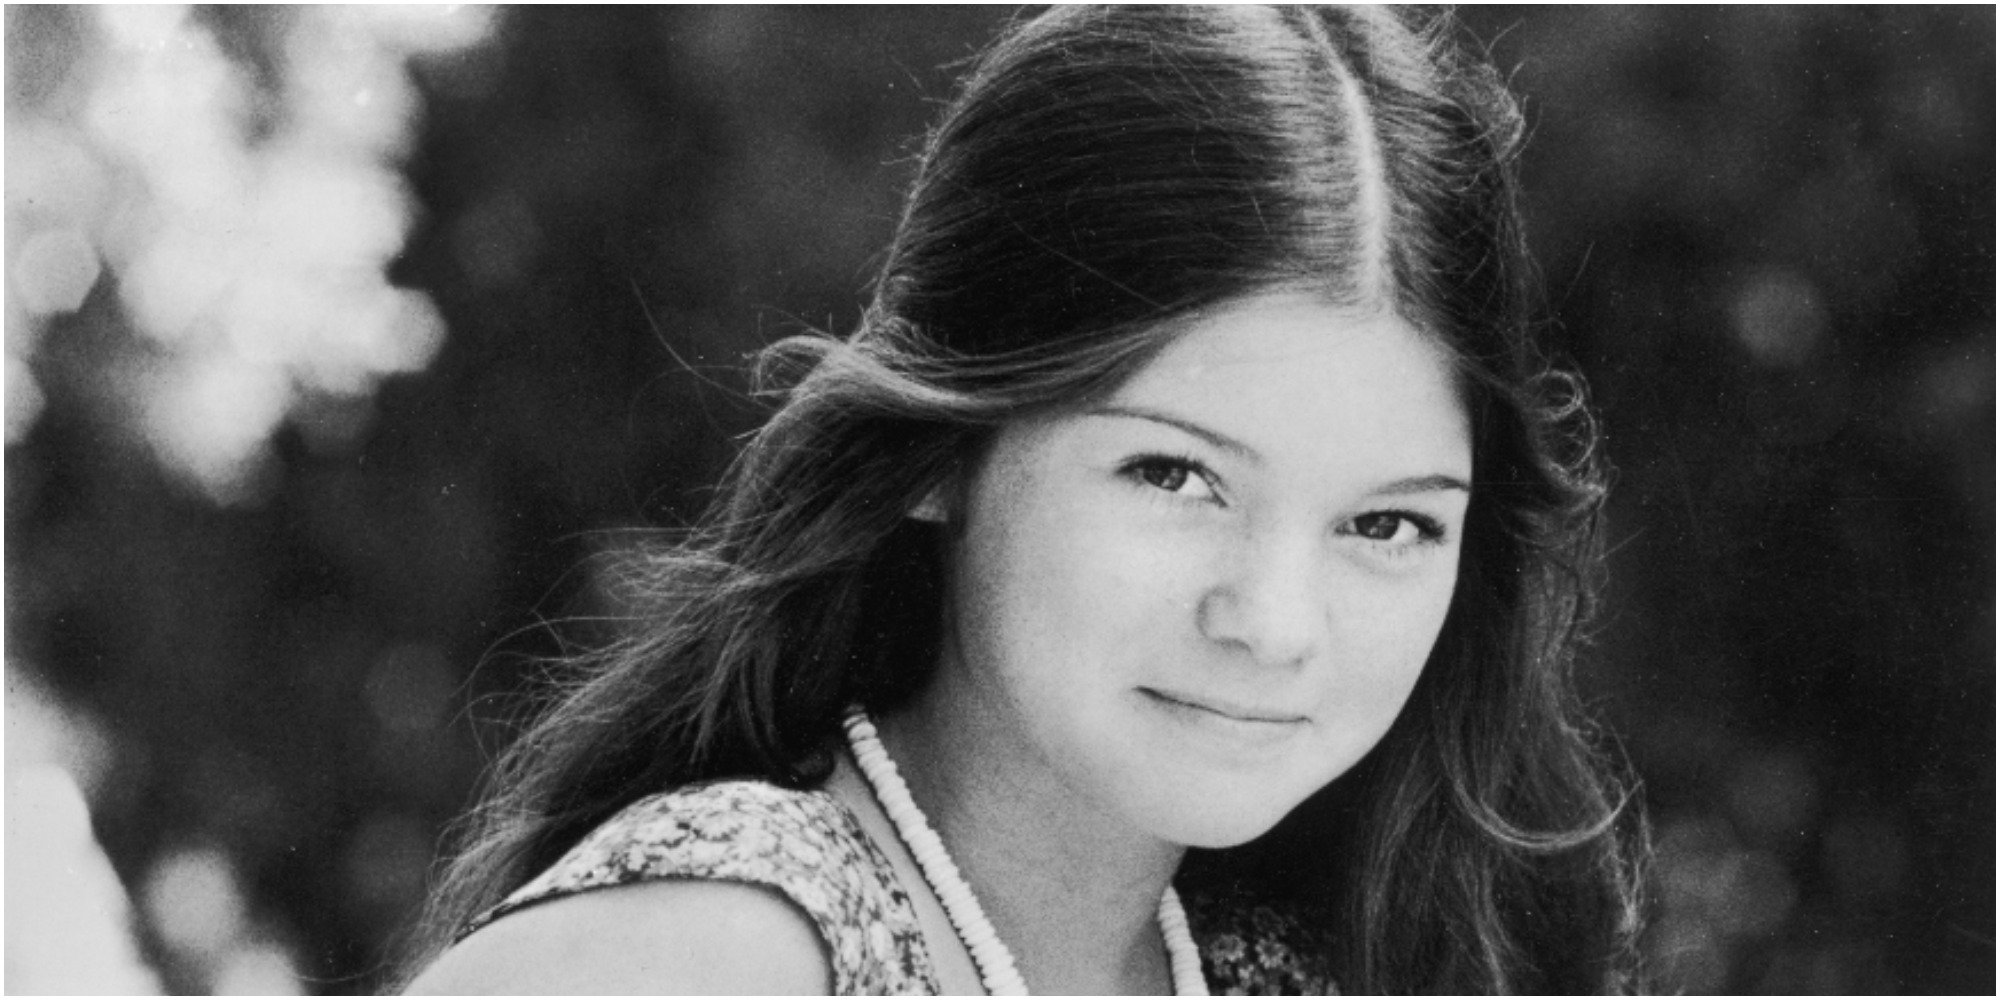 Valerie Bertinelli in the early 1970s.